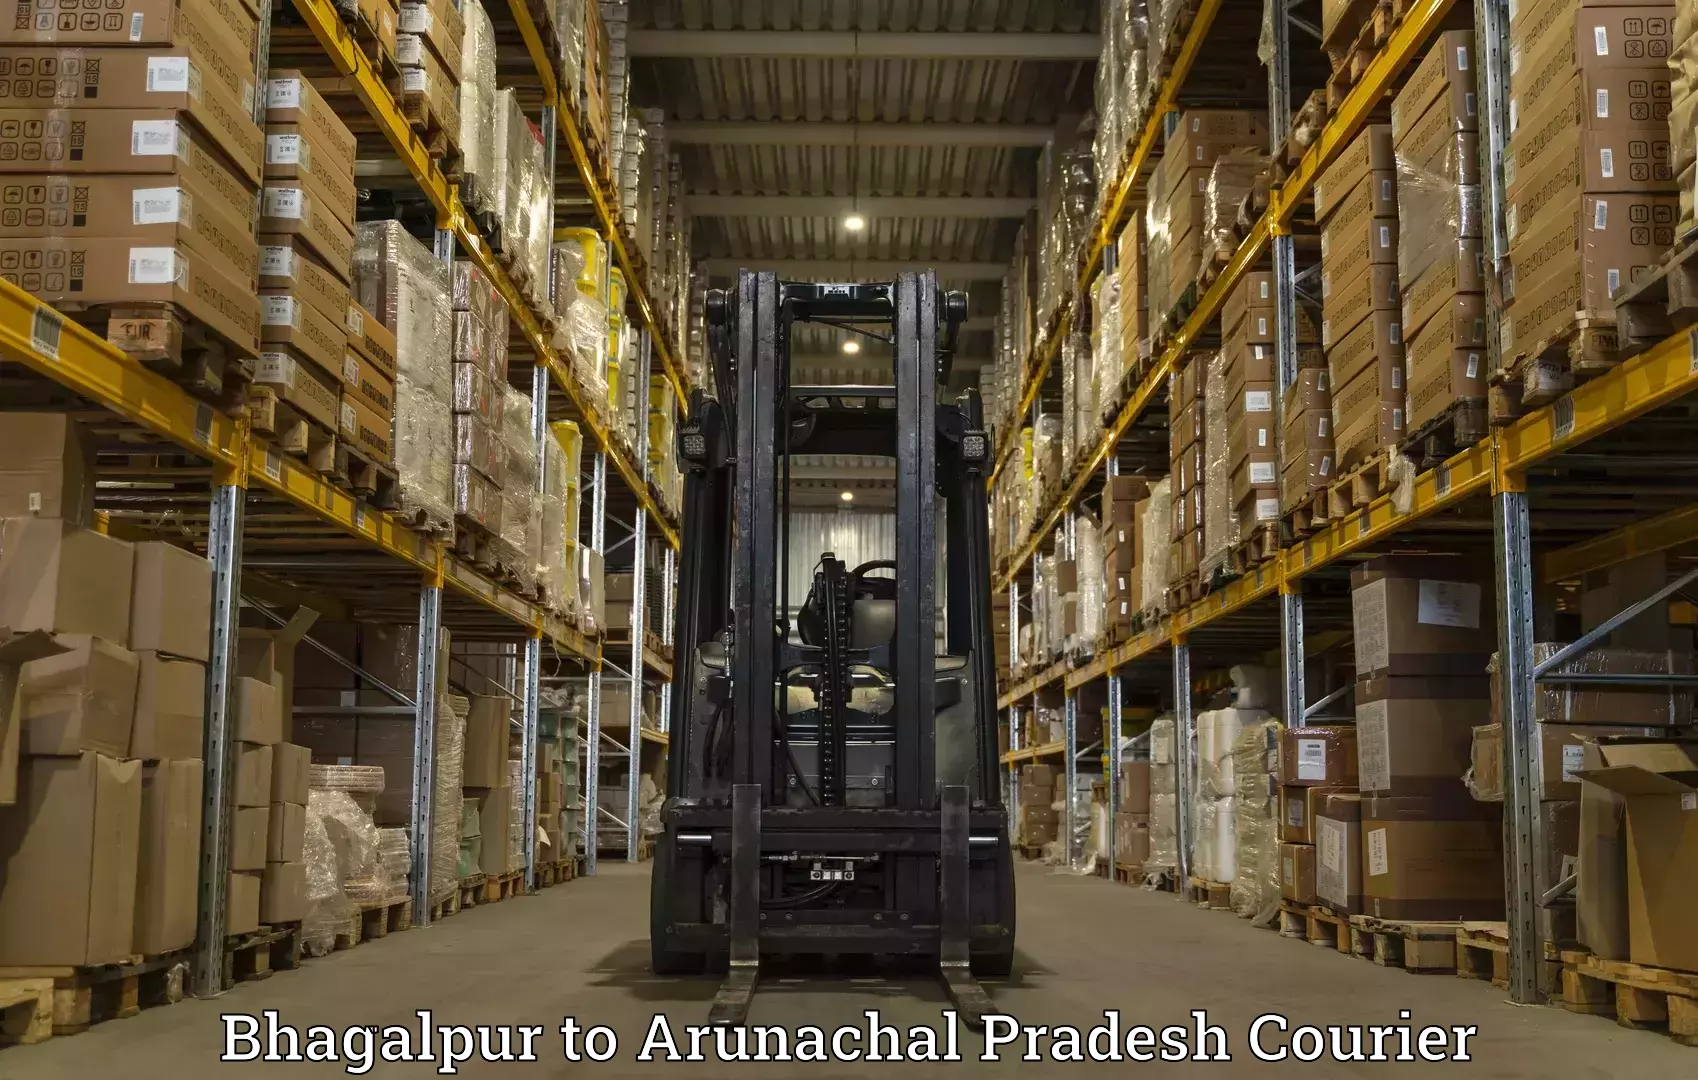 State-of-the-art courier technology Bhagalpur to Boleng